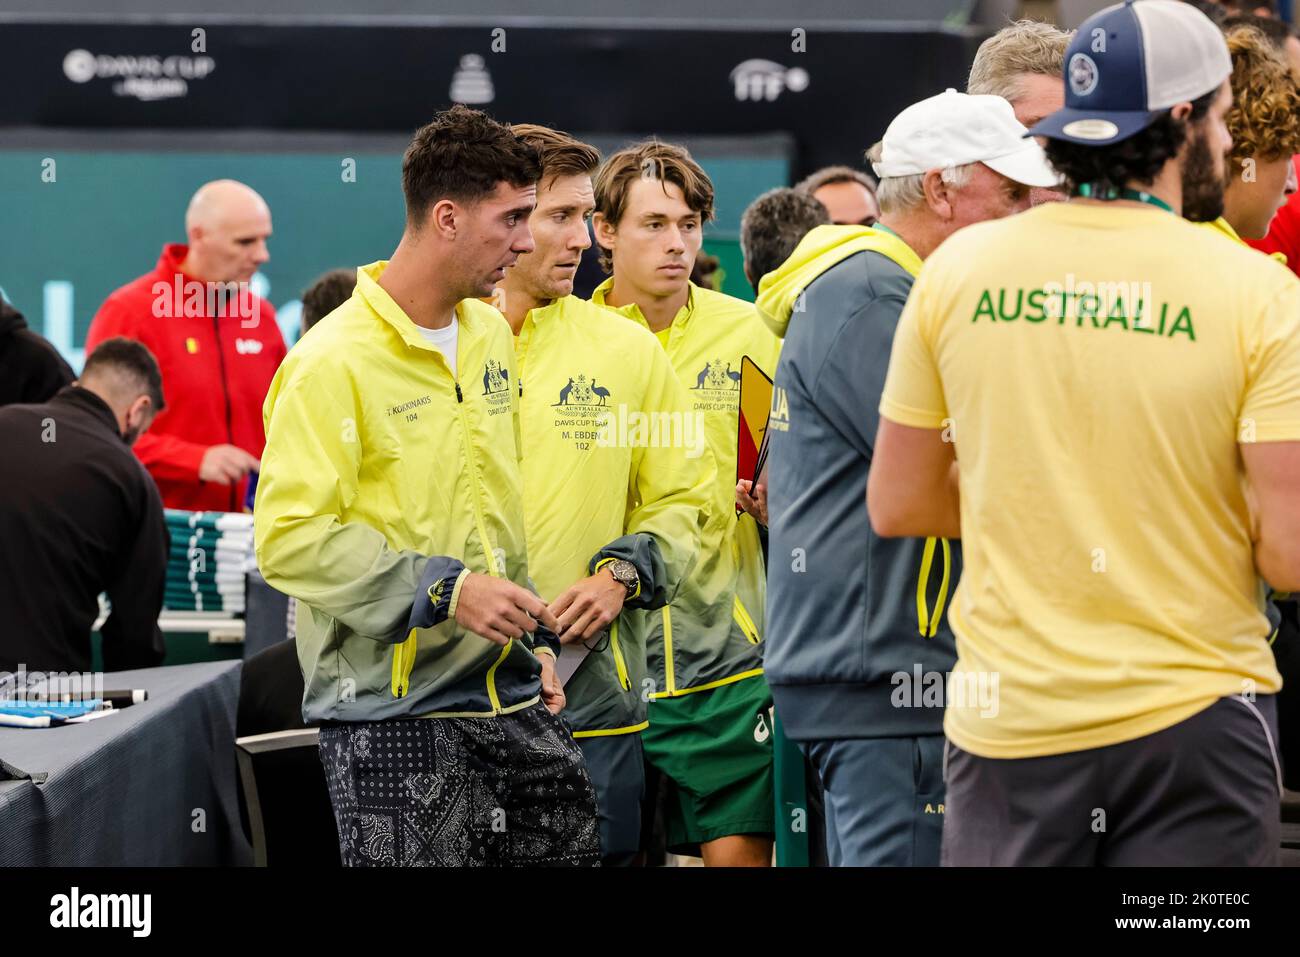 Hamburg, Germany, 13th Sep, 2022. Thanasi Kokkinakis (L) and the australian Team stand together during the group stage match between Belgium and Australia at the 2022 Davis Cup finals in Hamburg, Germany. Photo credit: Frank Molter/Alamy Live news Stock Photo